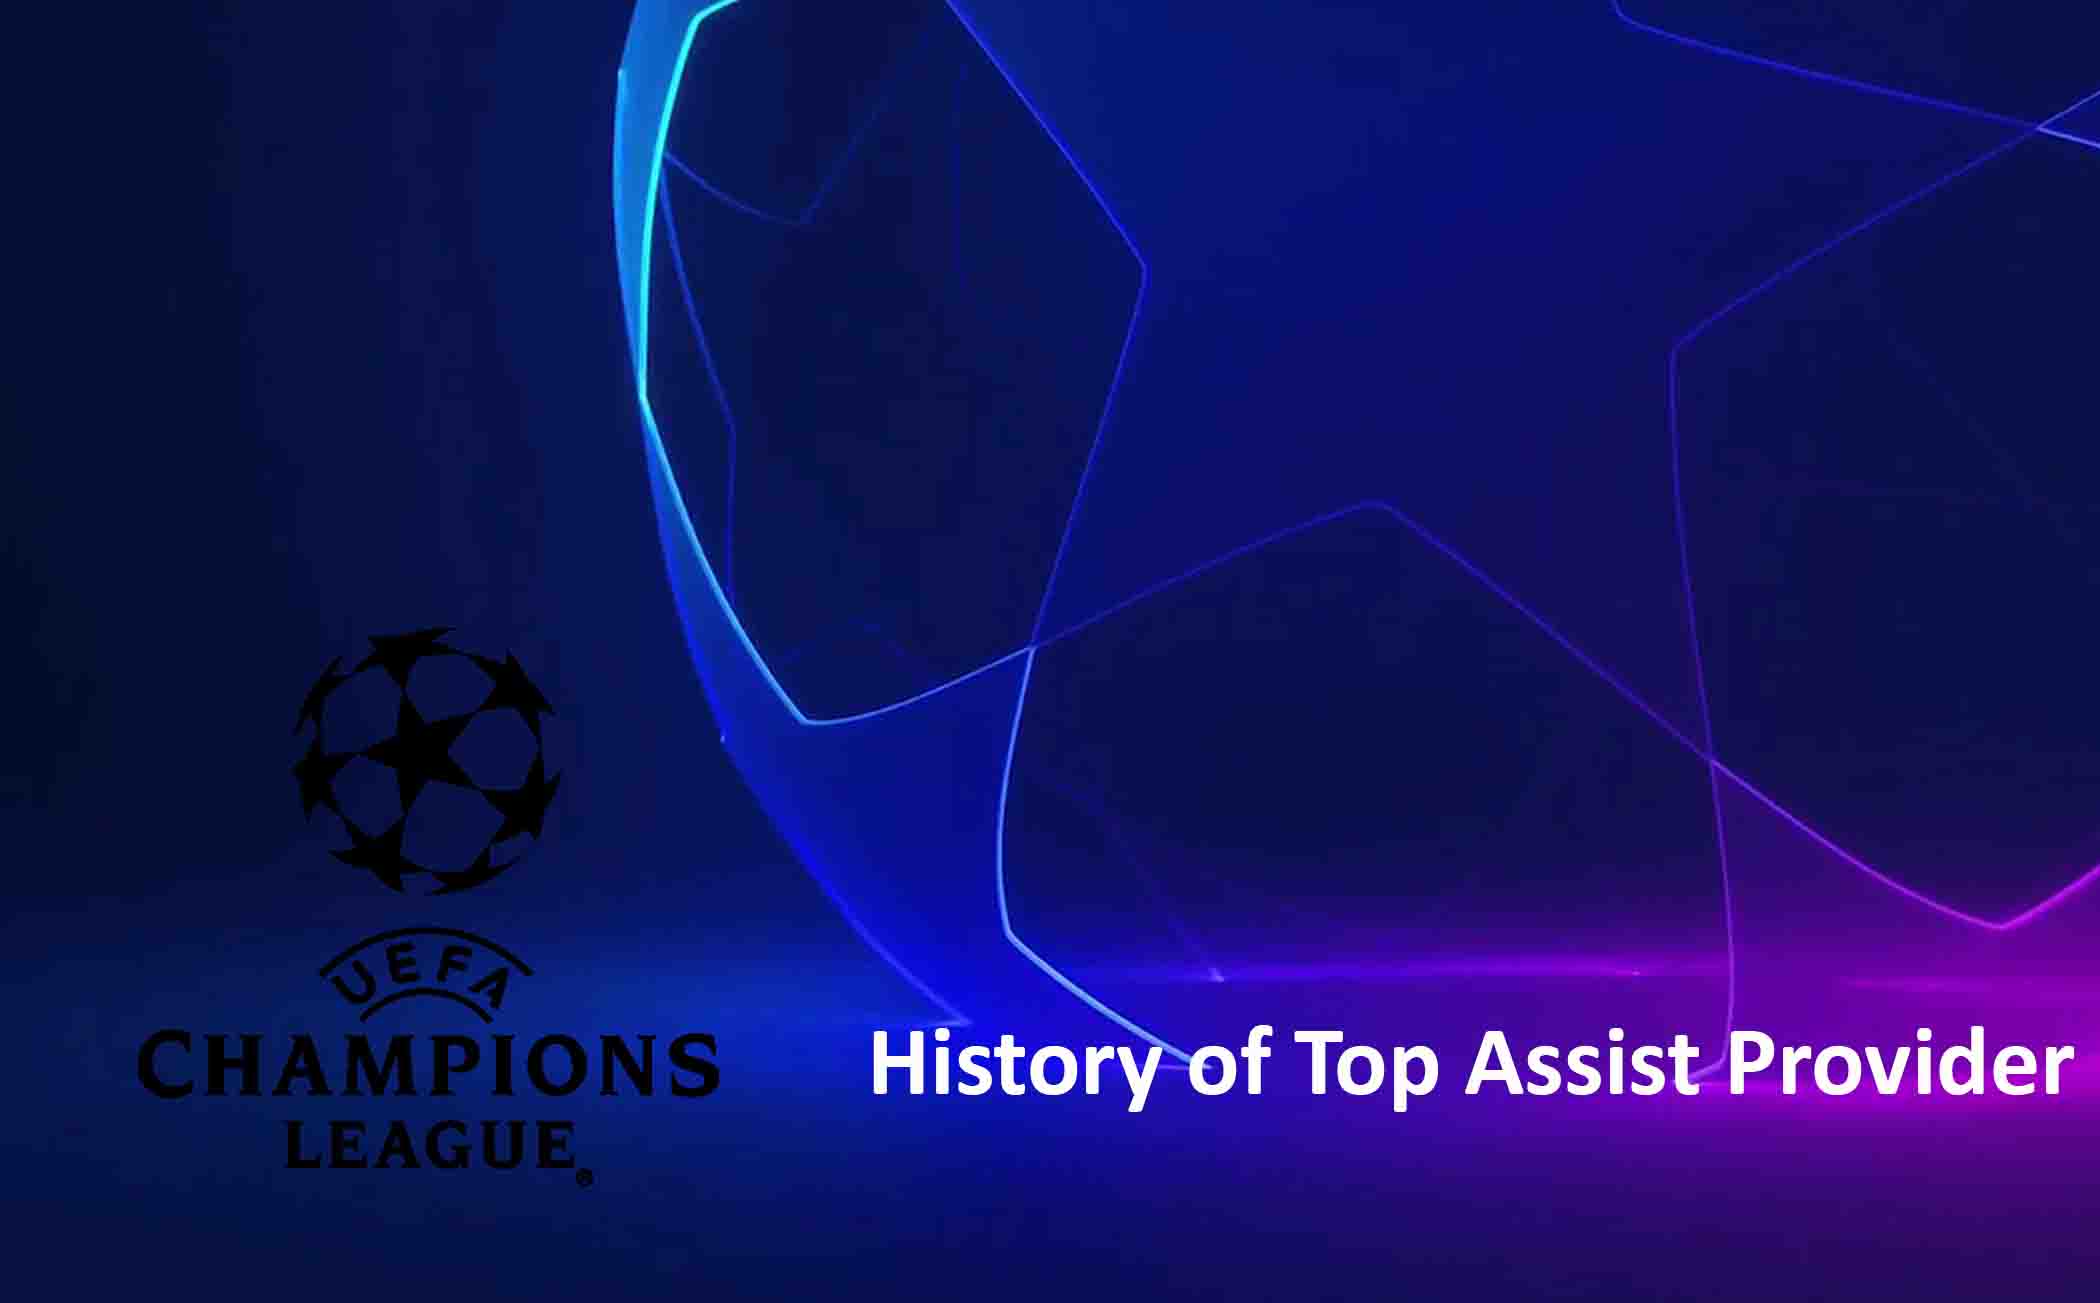 History of UEFA Champions League Top Assist Provider